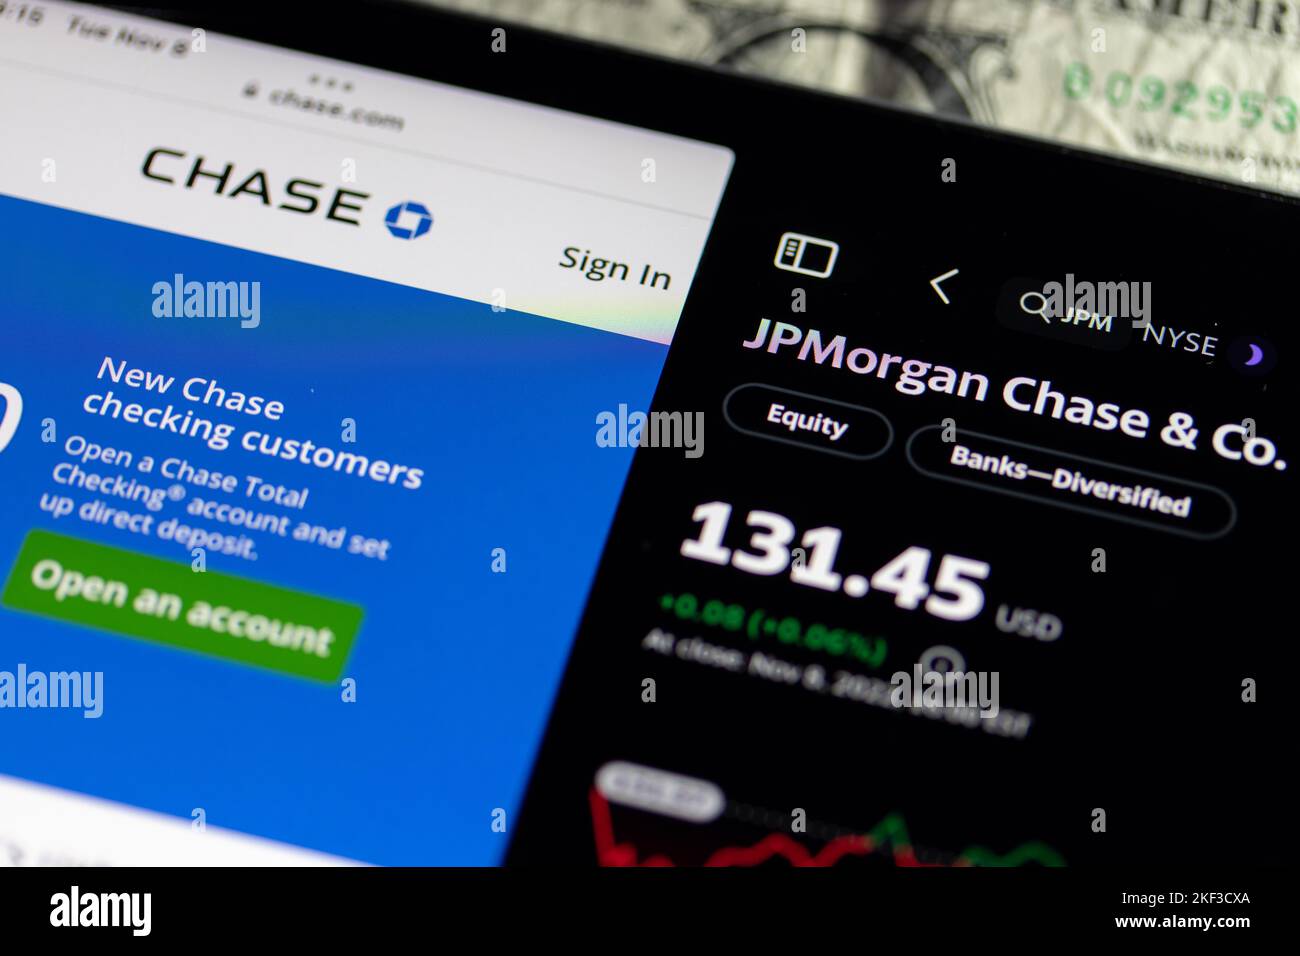 The JPMorgan Chase and Co., JPM on the NYSE, their share price is seen on a digital screen, next to the Chase bank website. Stock Photo